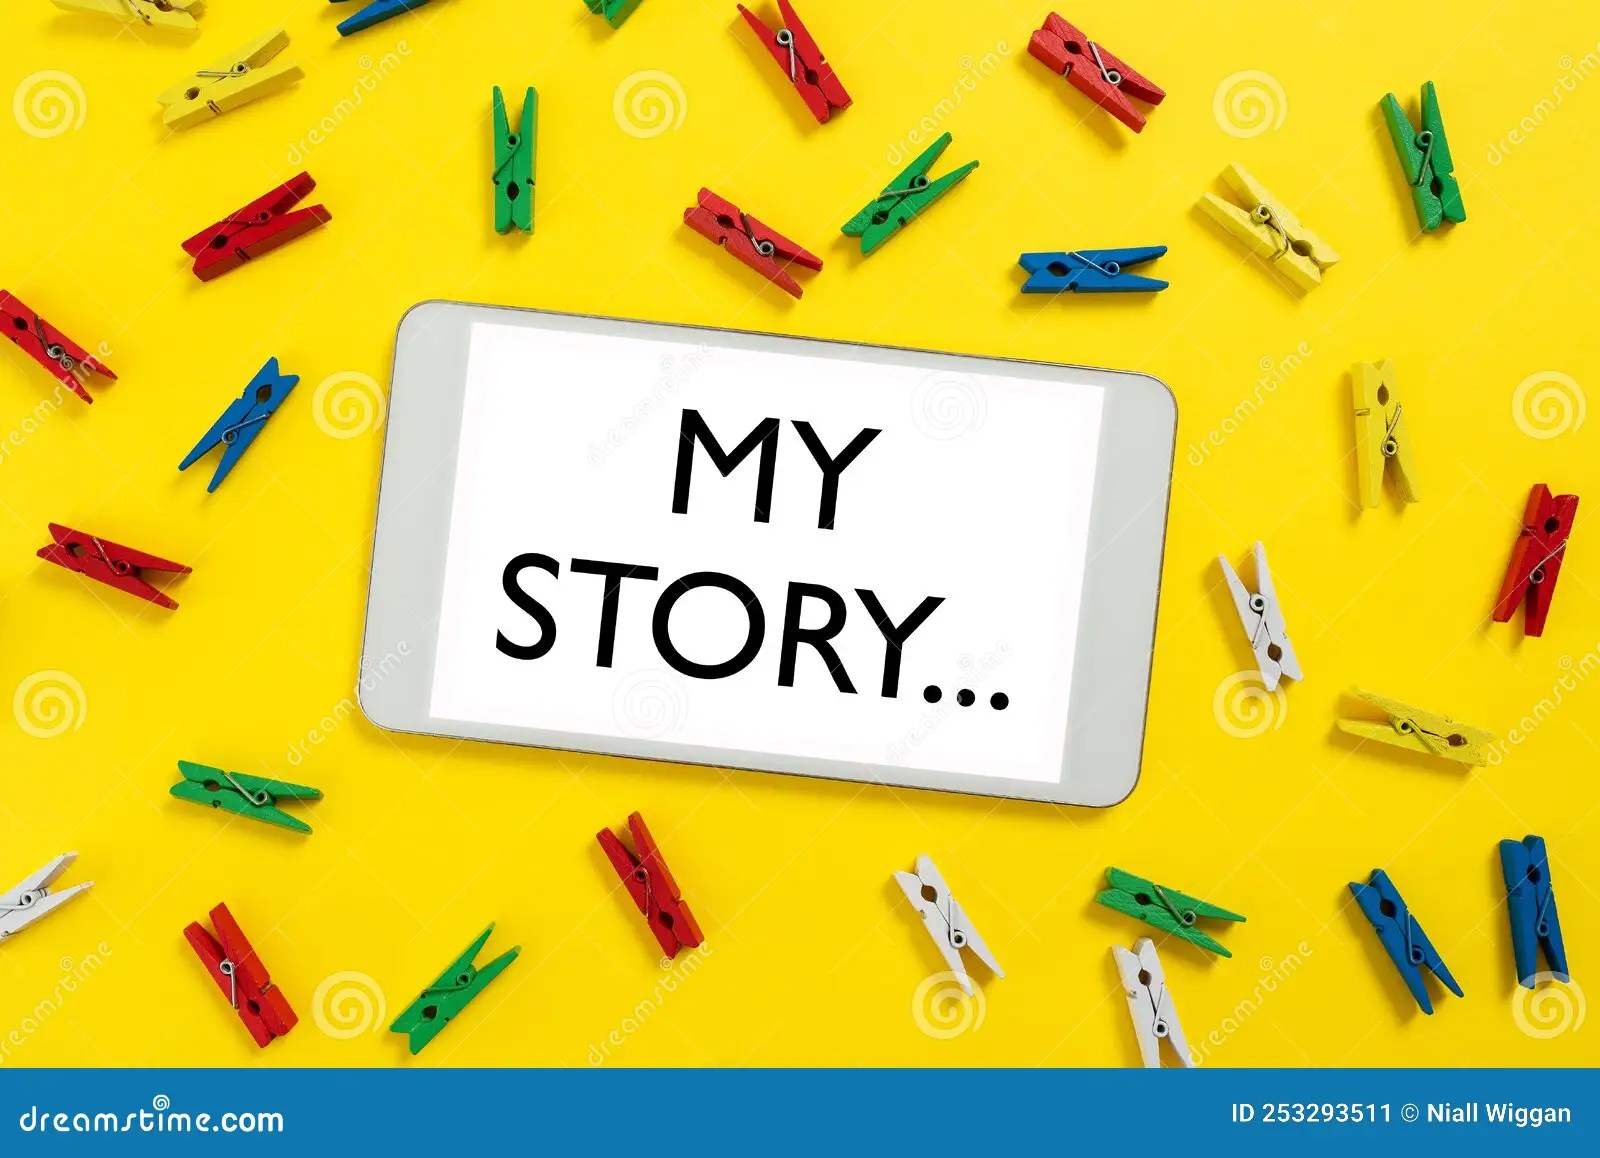 How To Start Writing My Life Story